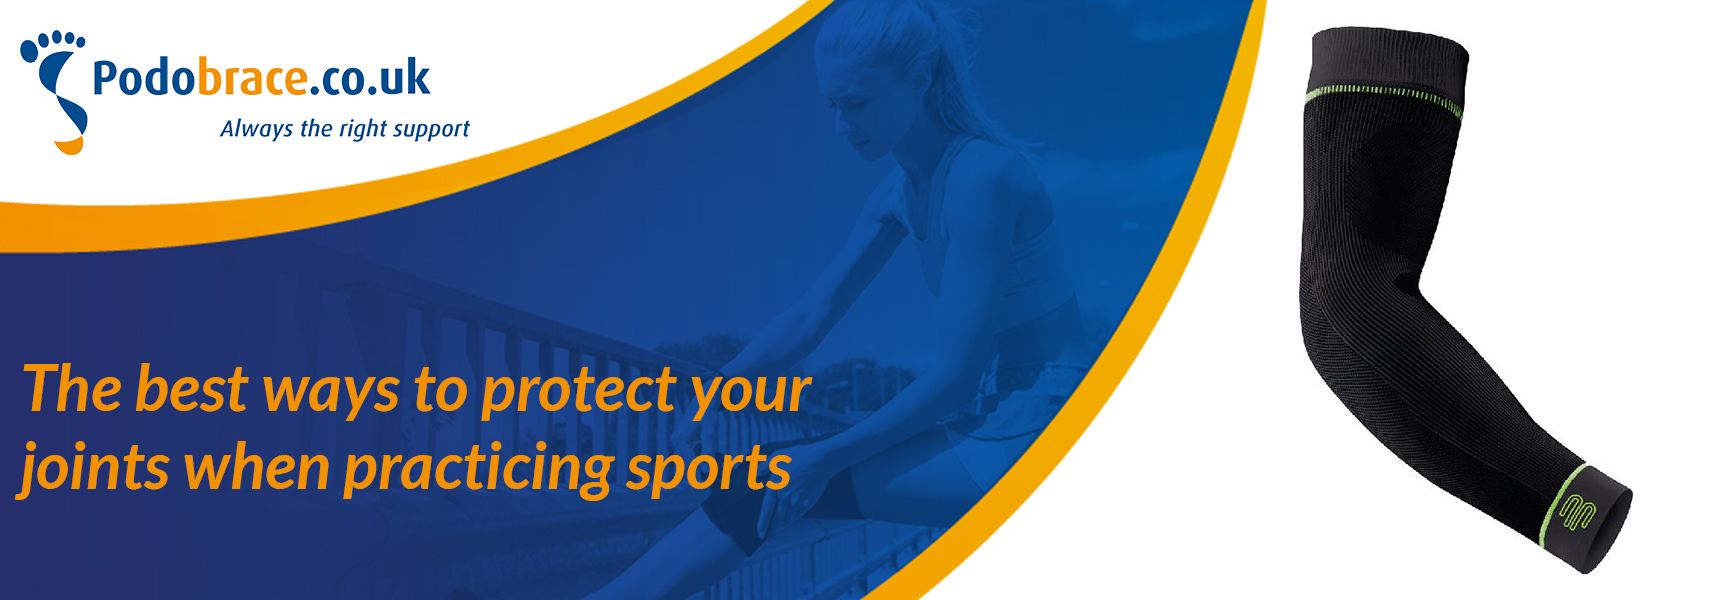 The best ways to protect your joints when practicing sports